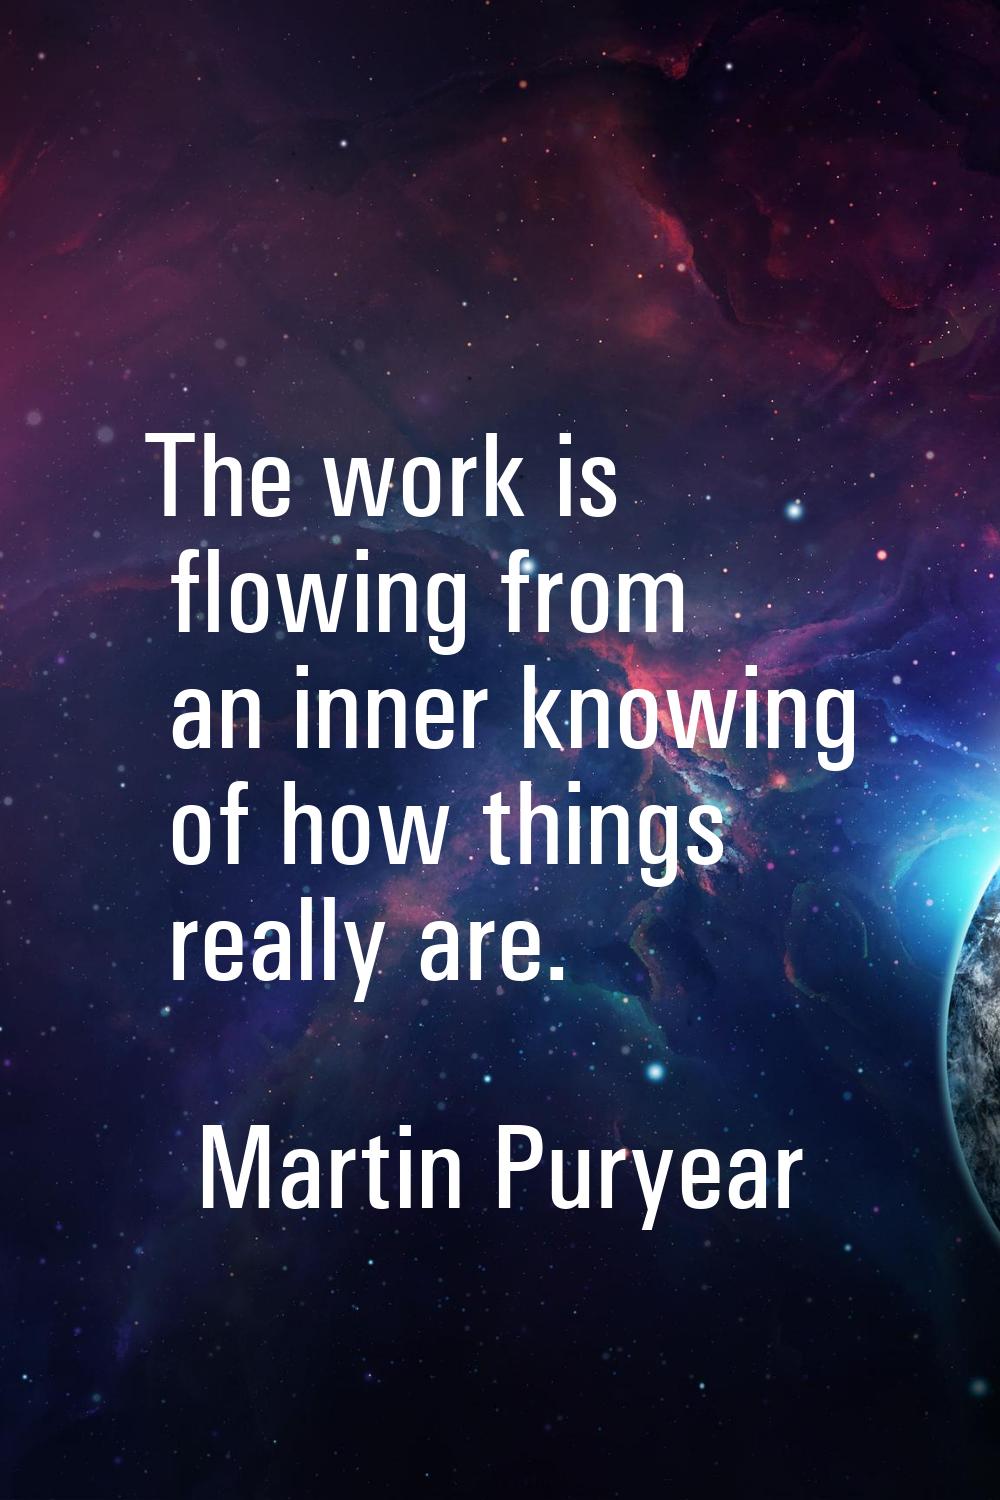 The work is flowing from an inner knowing of how things really are.